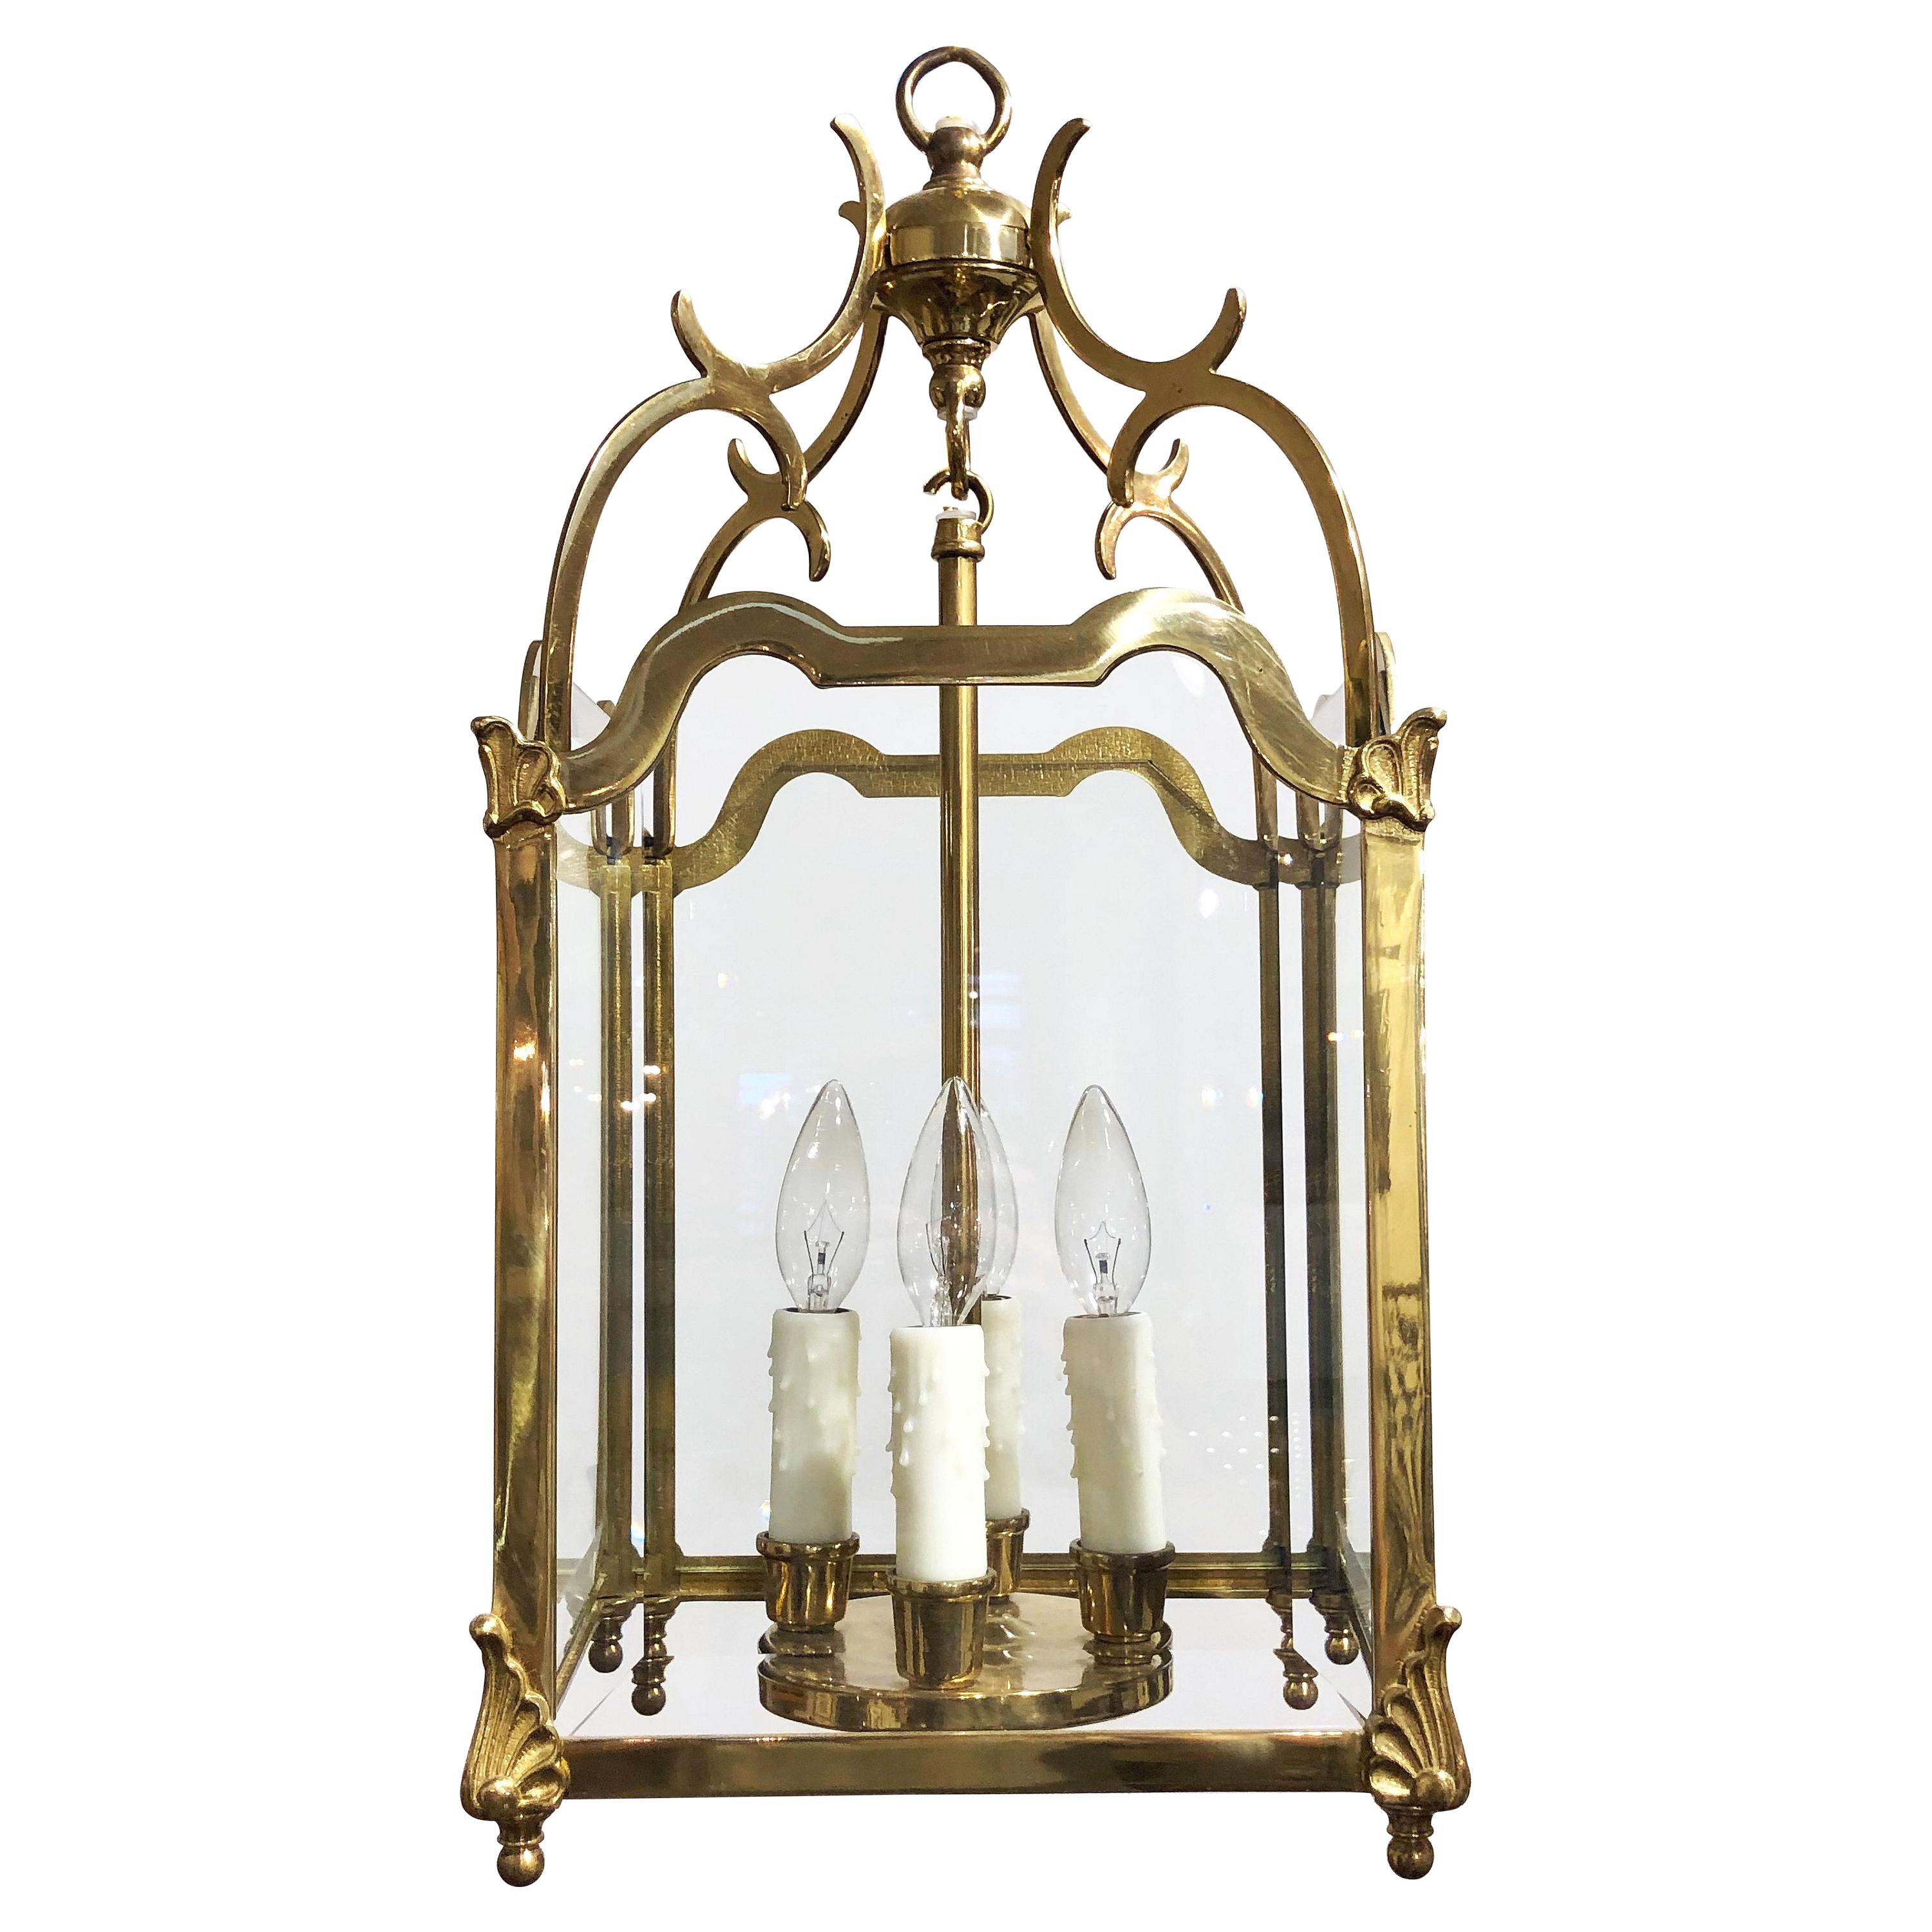 English Four-Light Hanging Lantern or Light Fixture of Brass with Beveled Glass